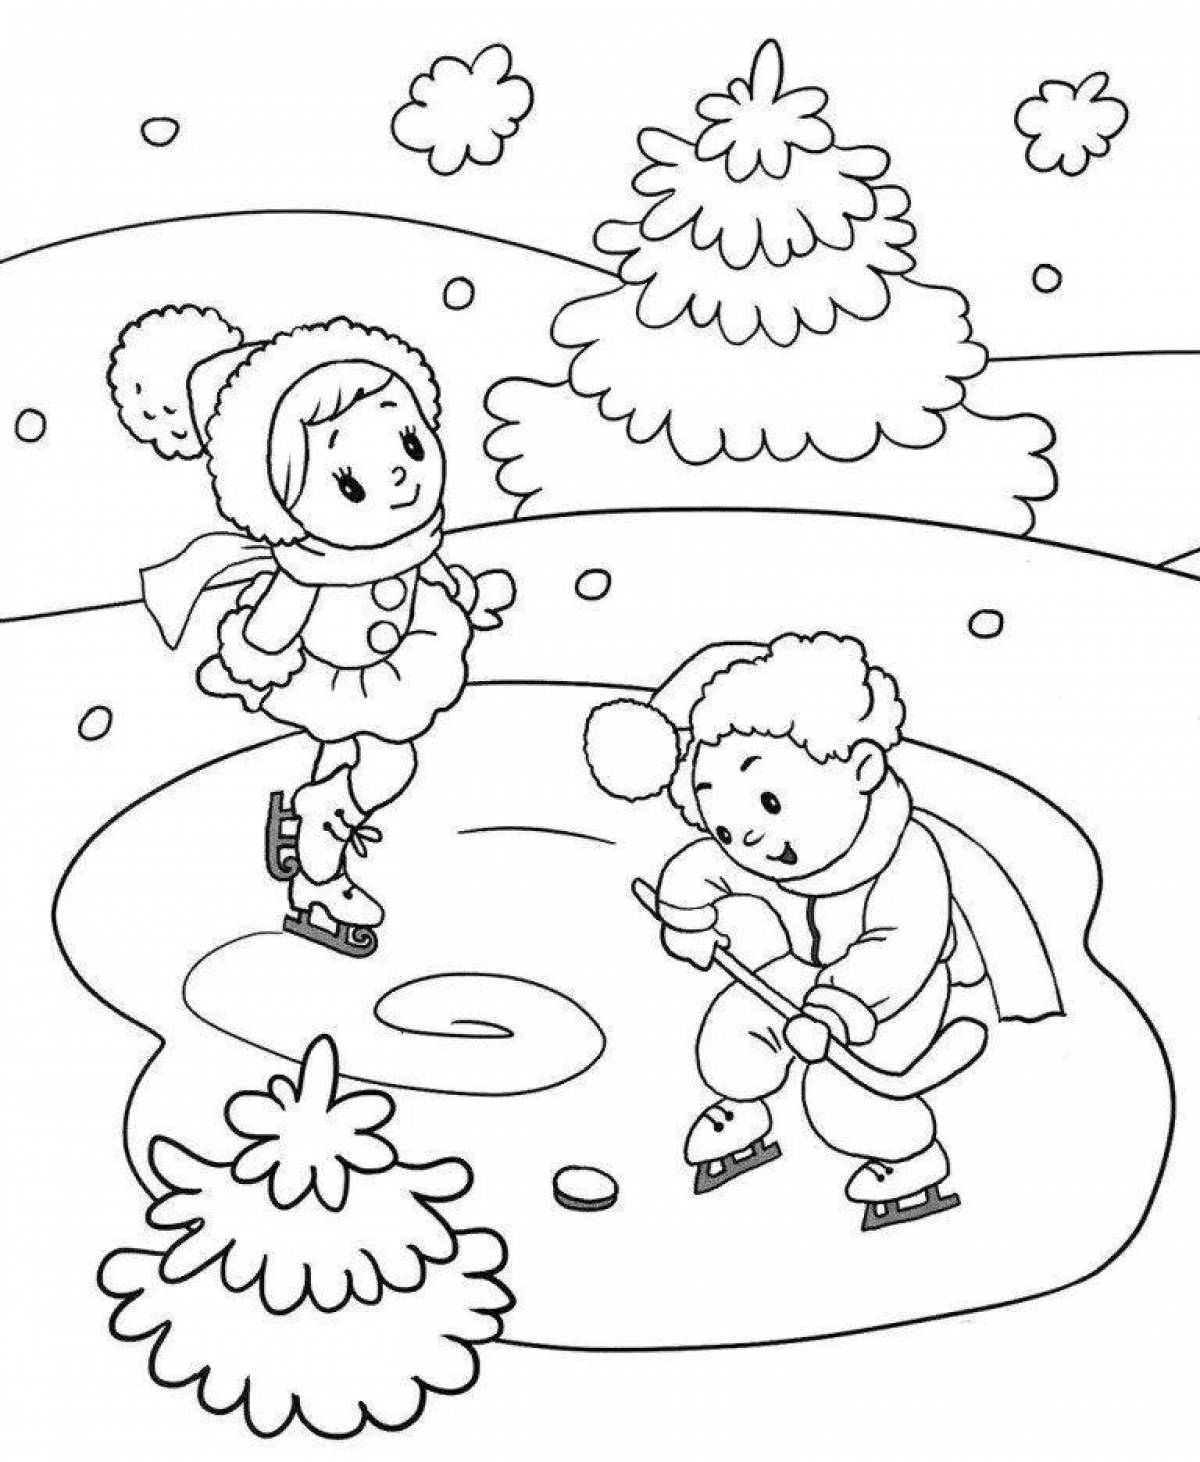 Joyful winter coloring for children 3-4 years old